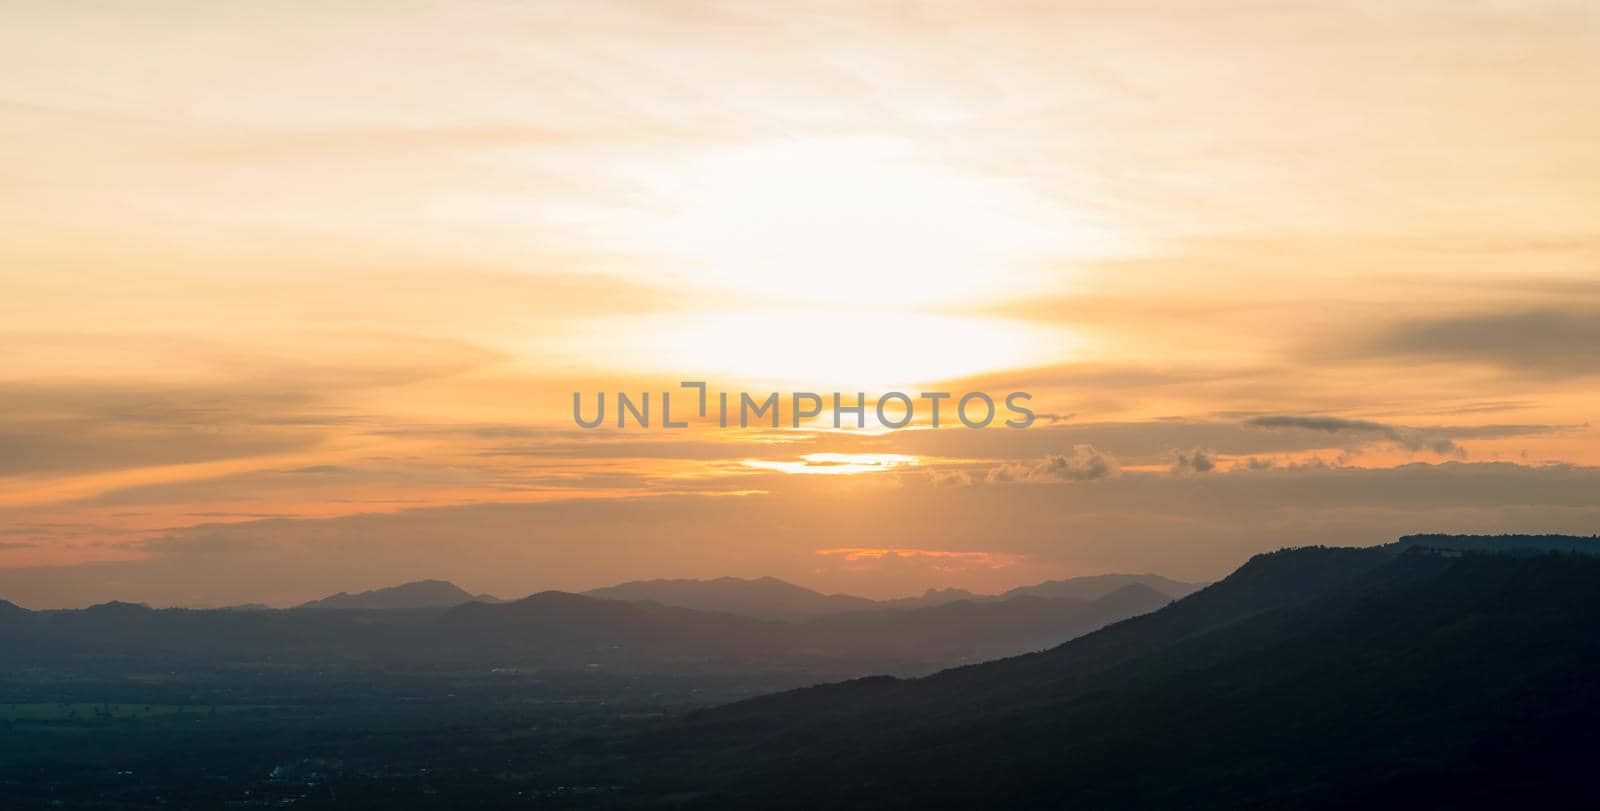 Landscape of mountain range with sunset sky. Mountain at dusk. Orange sky and clouds at sunset. Mountain valley. Mountain layer at dusk. Beauty in nature. Tranquility scene. Beautiful sunset sky. by Fahroni